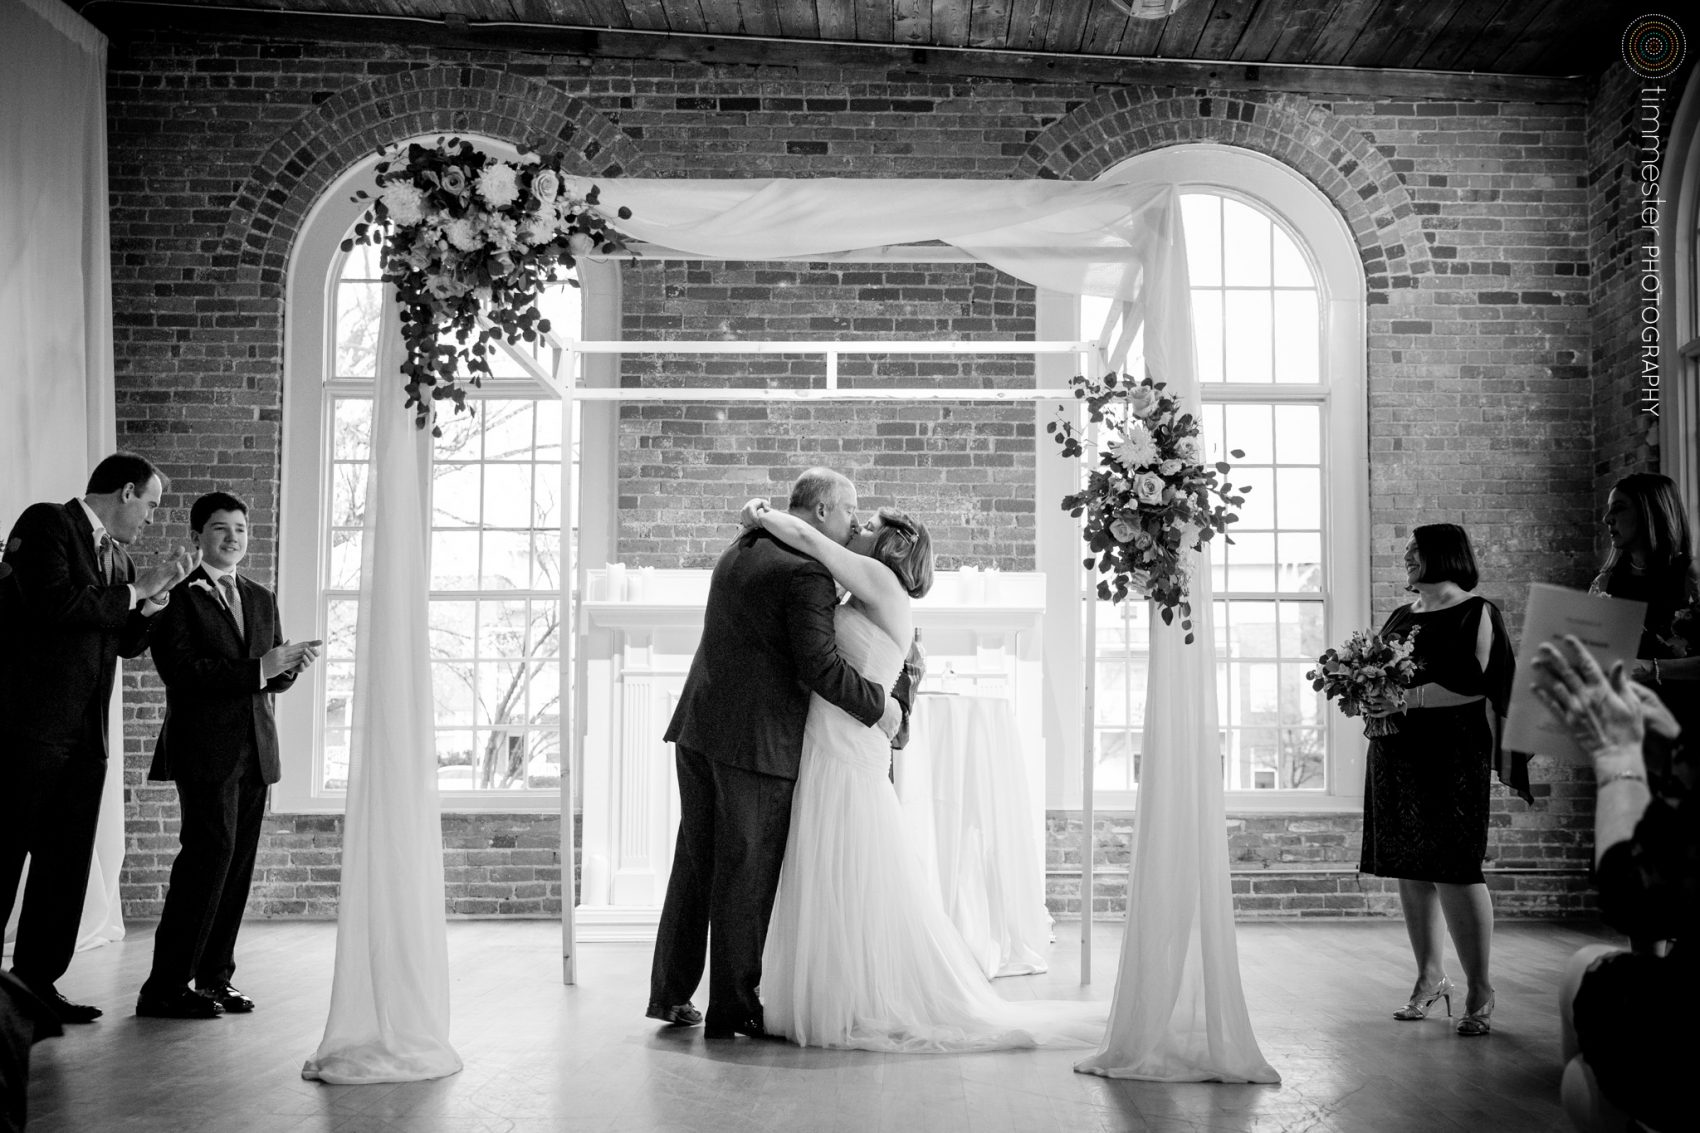 Jessica + David were married indoors at The Cotton Room in Durham, North Carolina on their February wedding day.